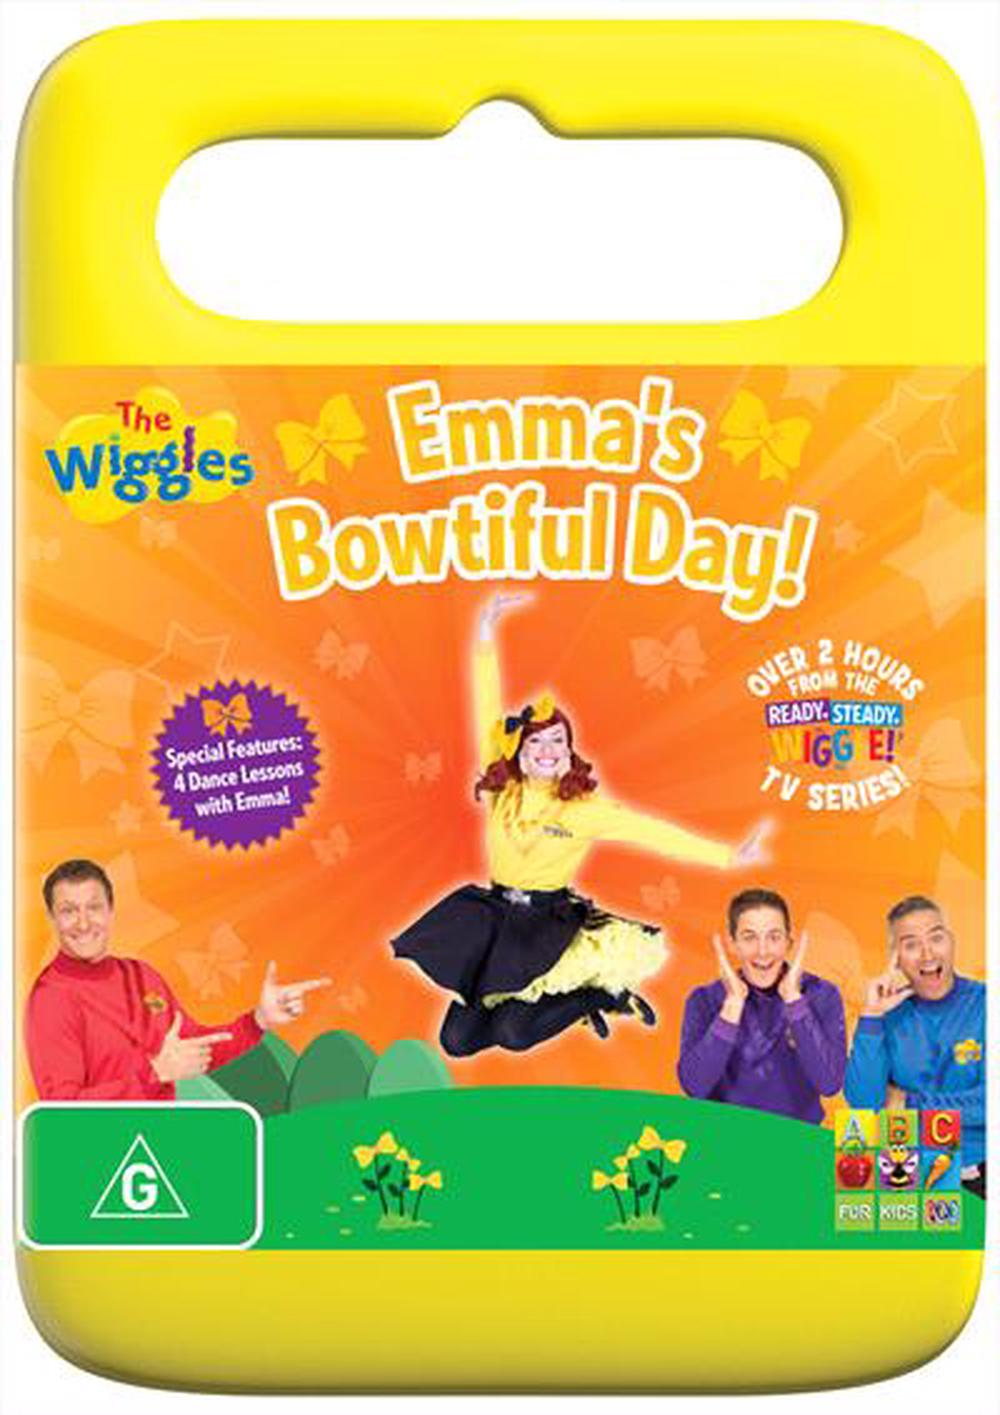 The Wiggles - Emma's Bowtiful Day!, DVD | Buy online at ...